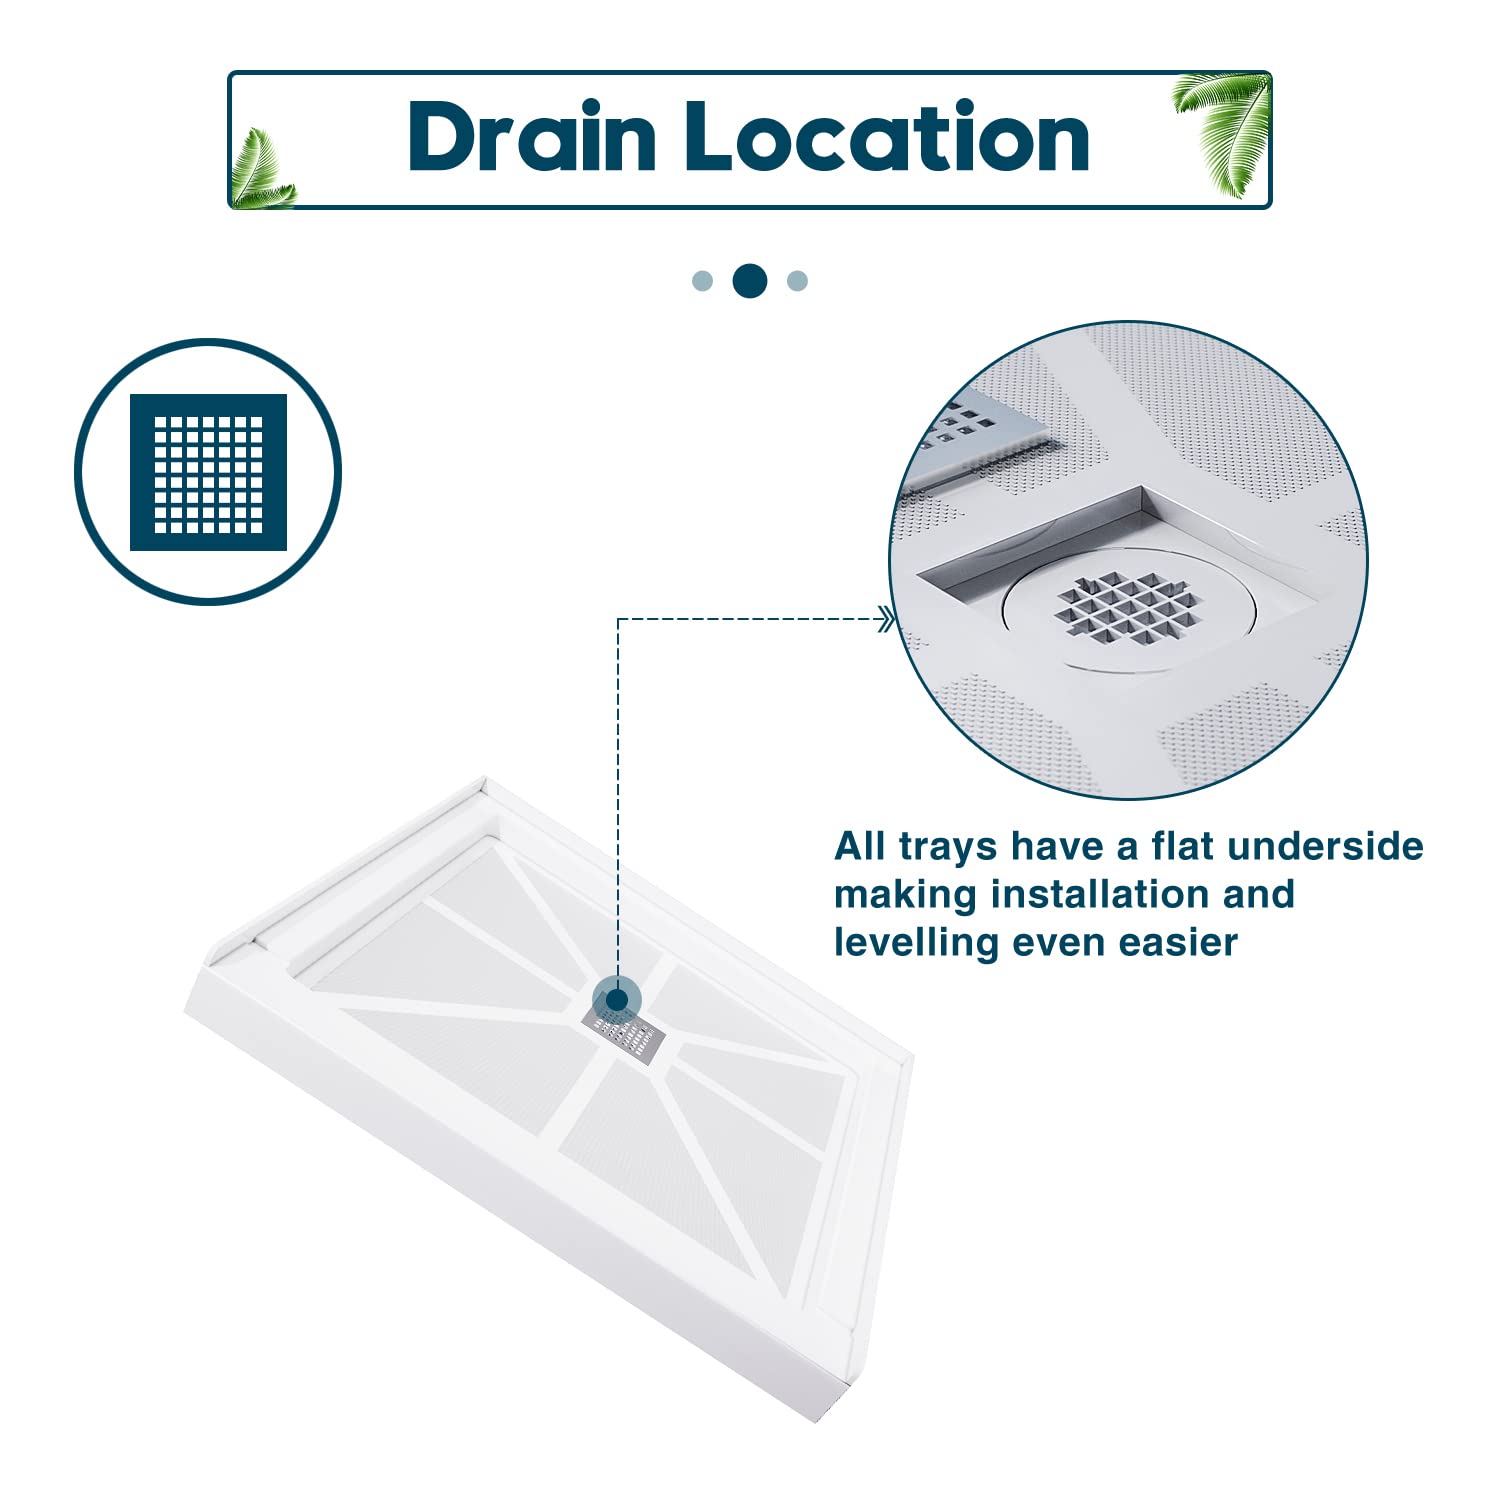 Drain Location:Center, All trays have a flat underside making installation and levelling even easier